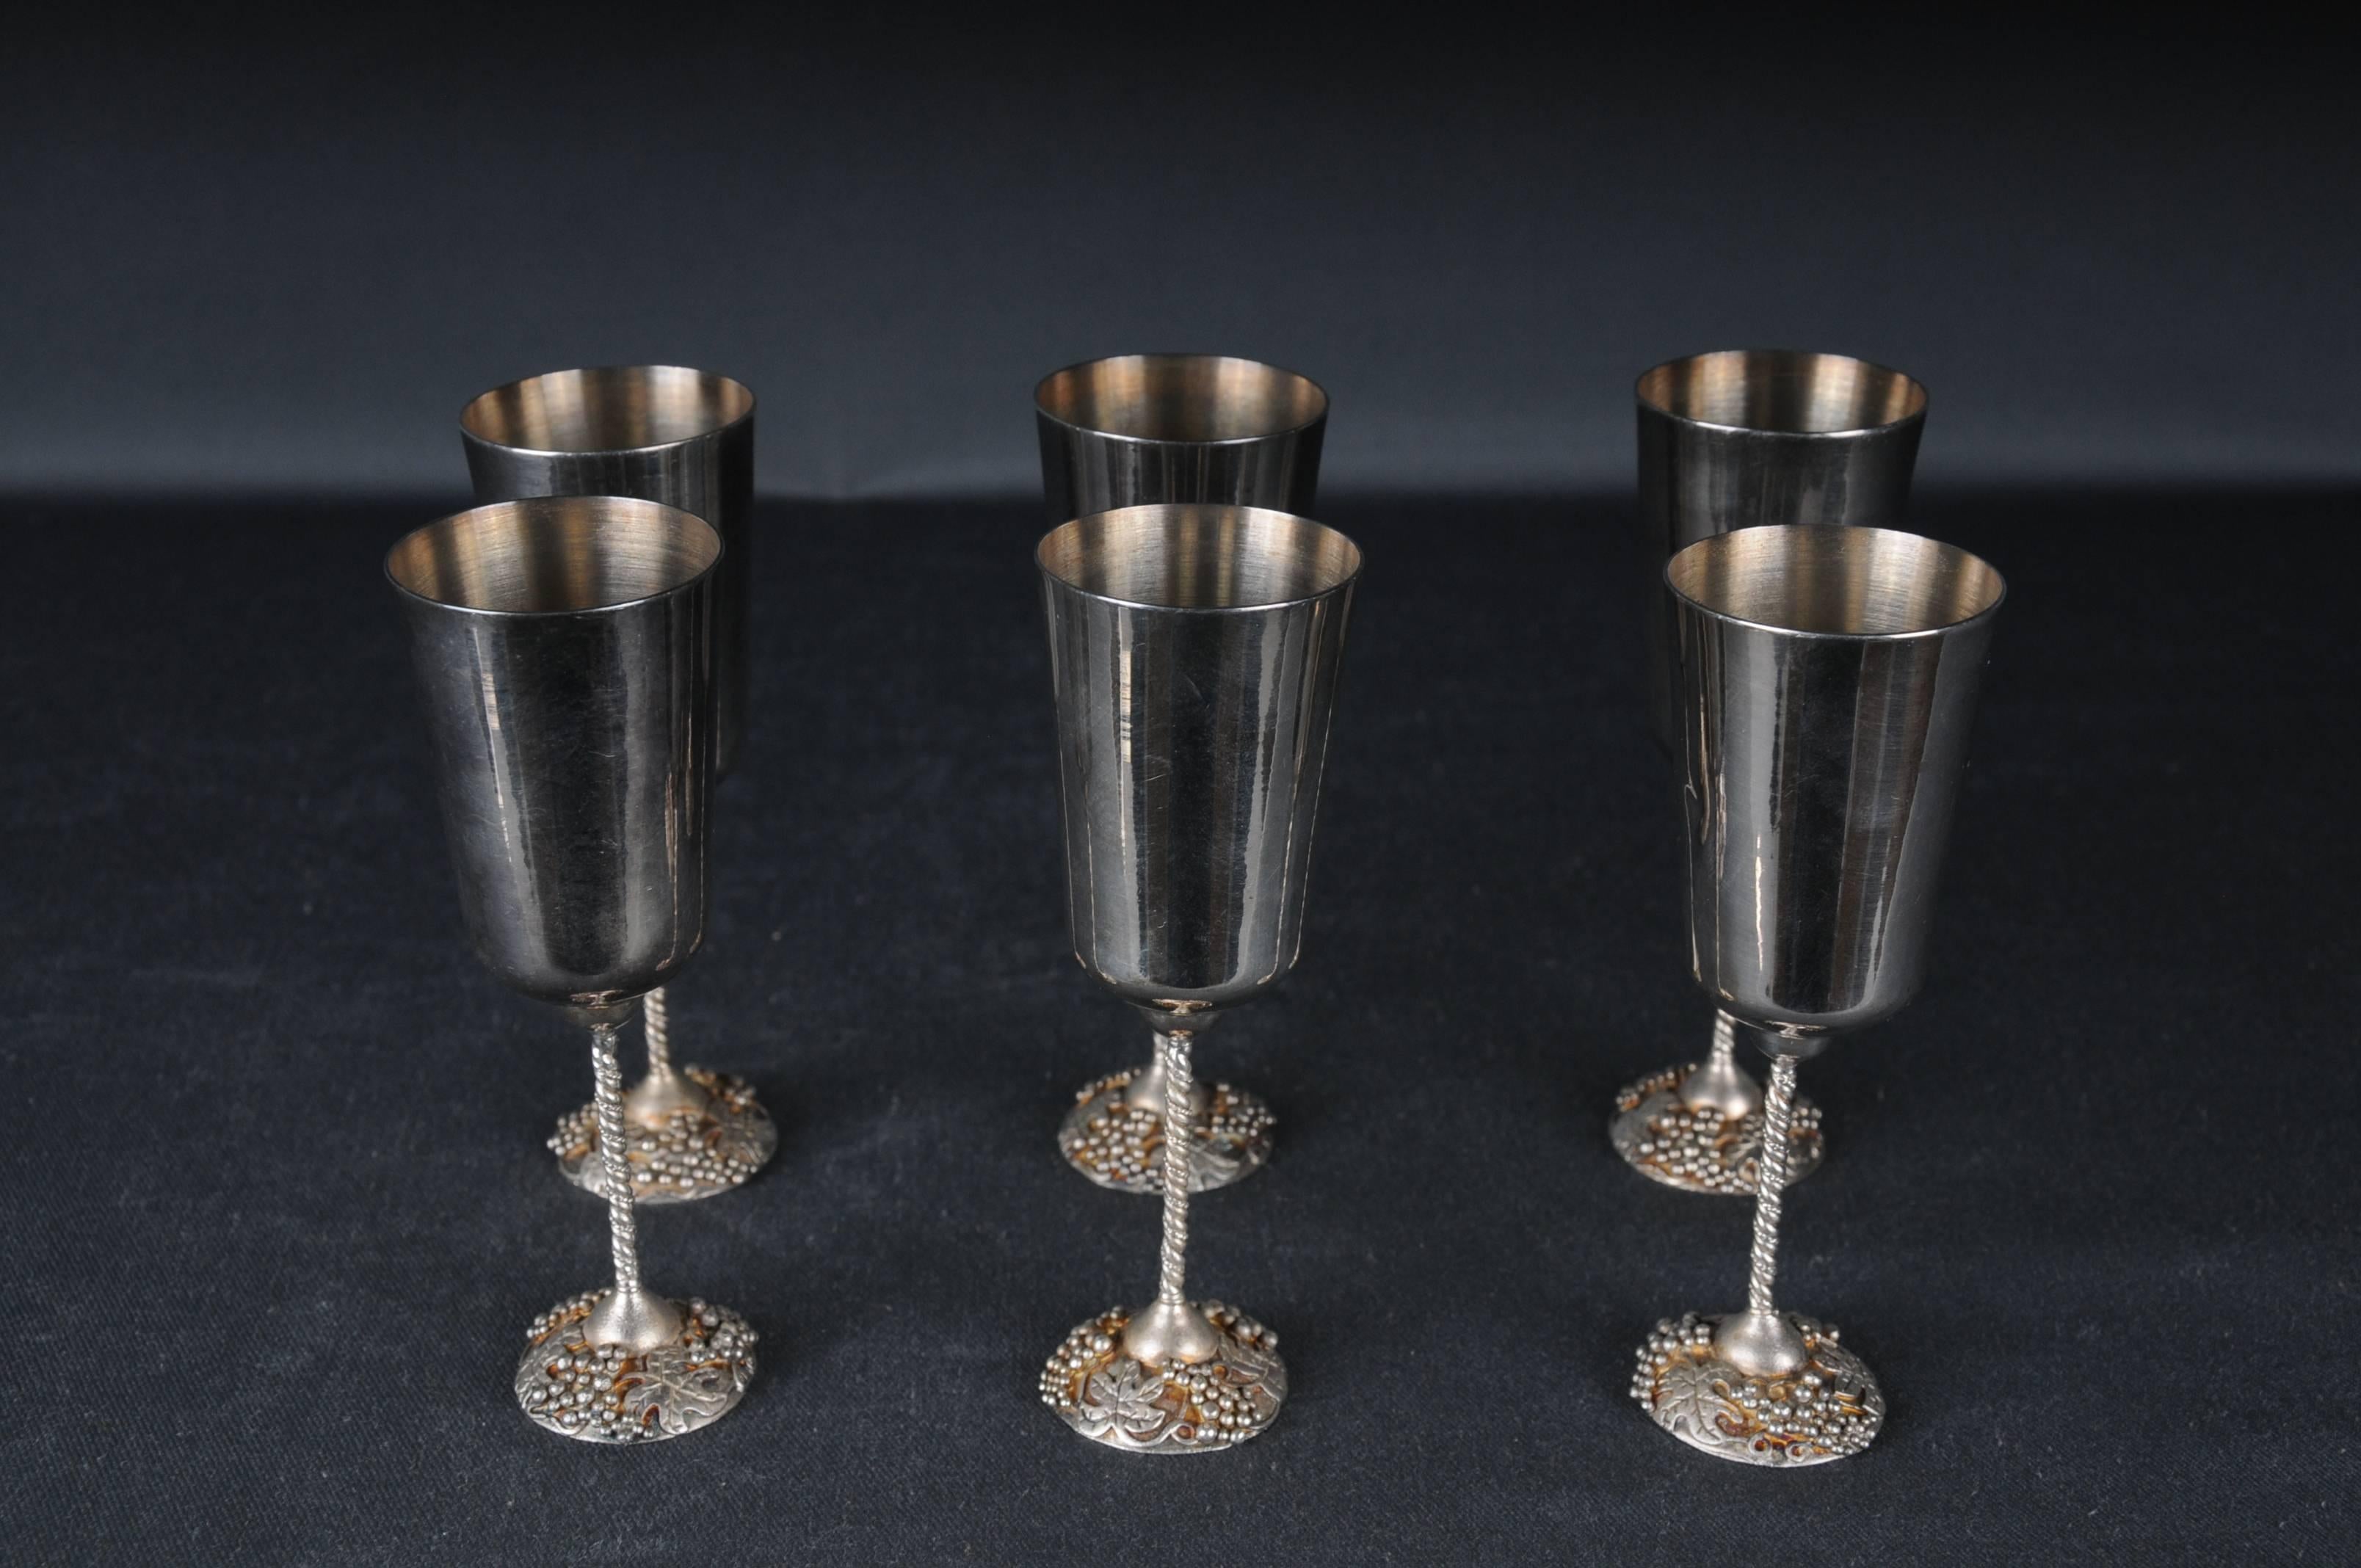 6 High-Quality Silver Chalice Cup Miniature 
with plastic grapes & leaves 

Made in Spain

Weight: 252 grams

The condition can be seen in the pictures.